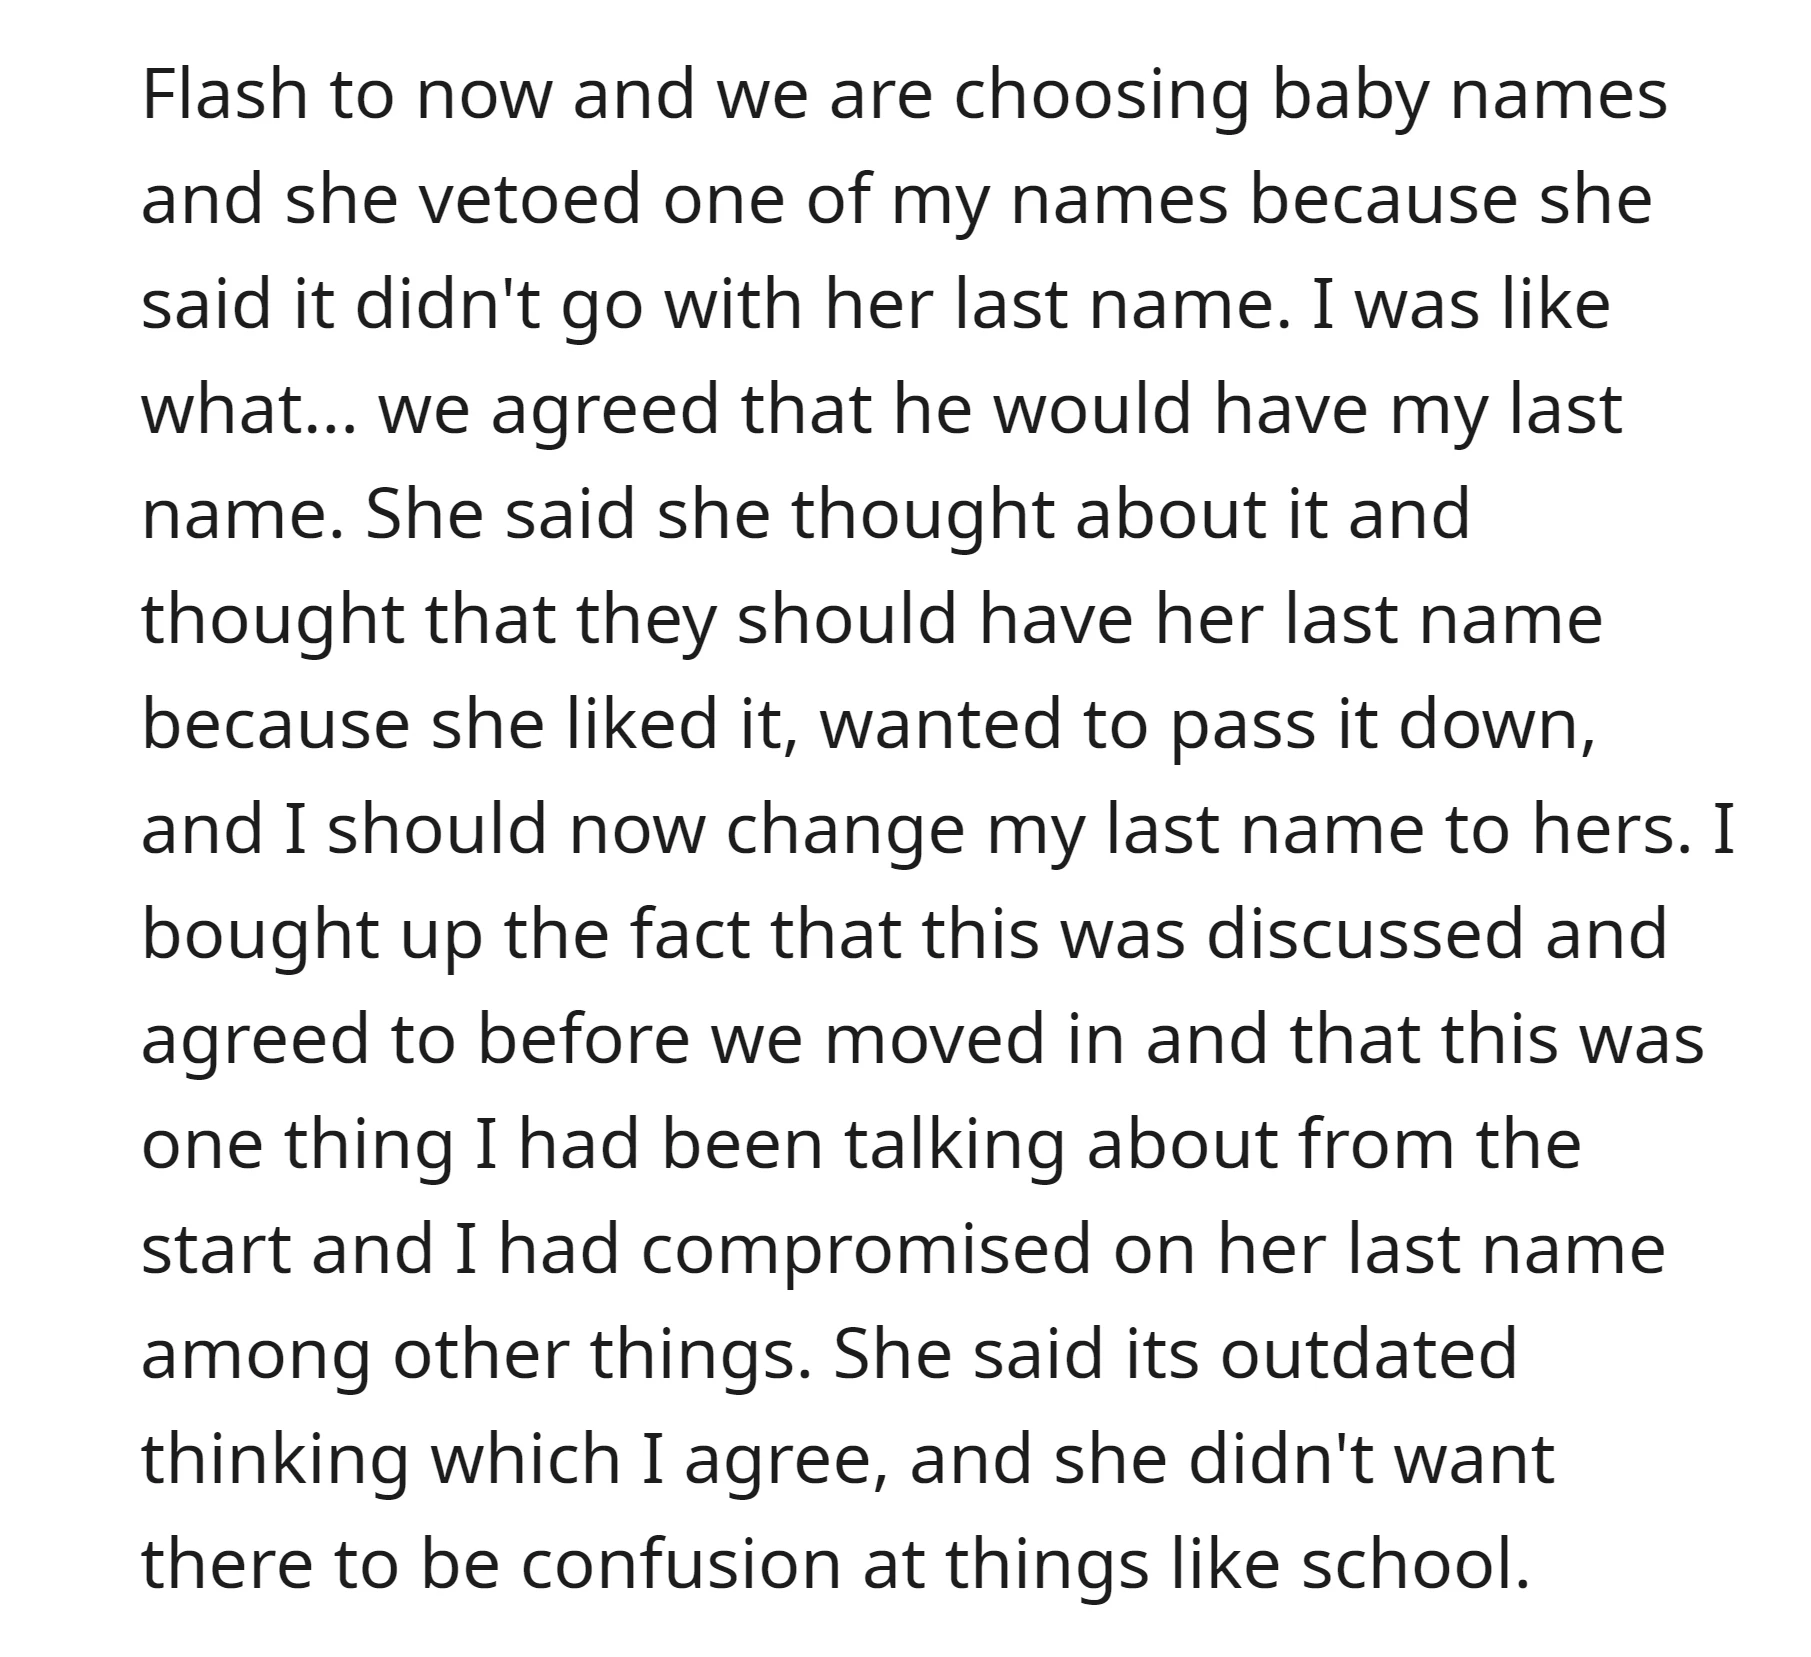 The OP's wife, contrary to their prior agreement, suggested giving their child her last name